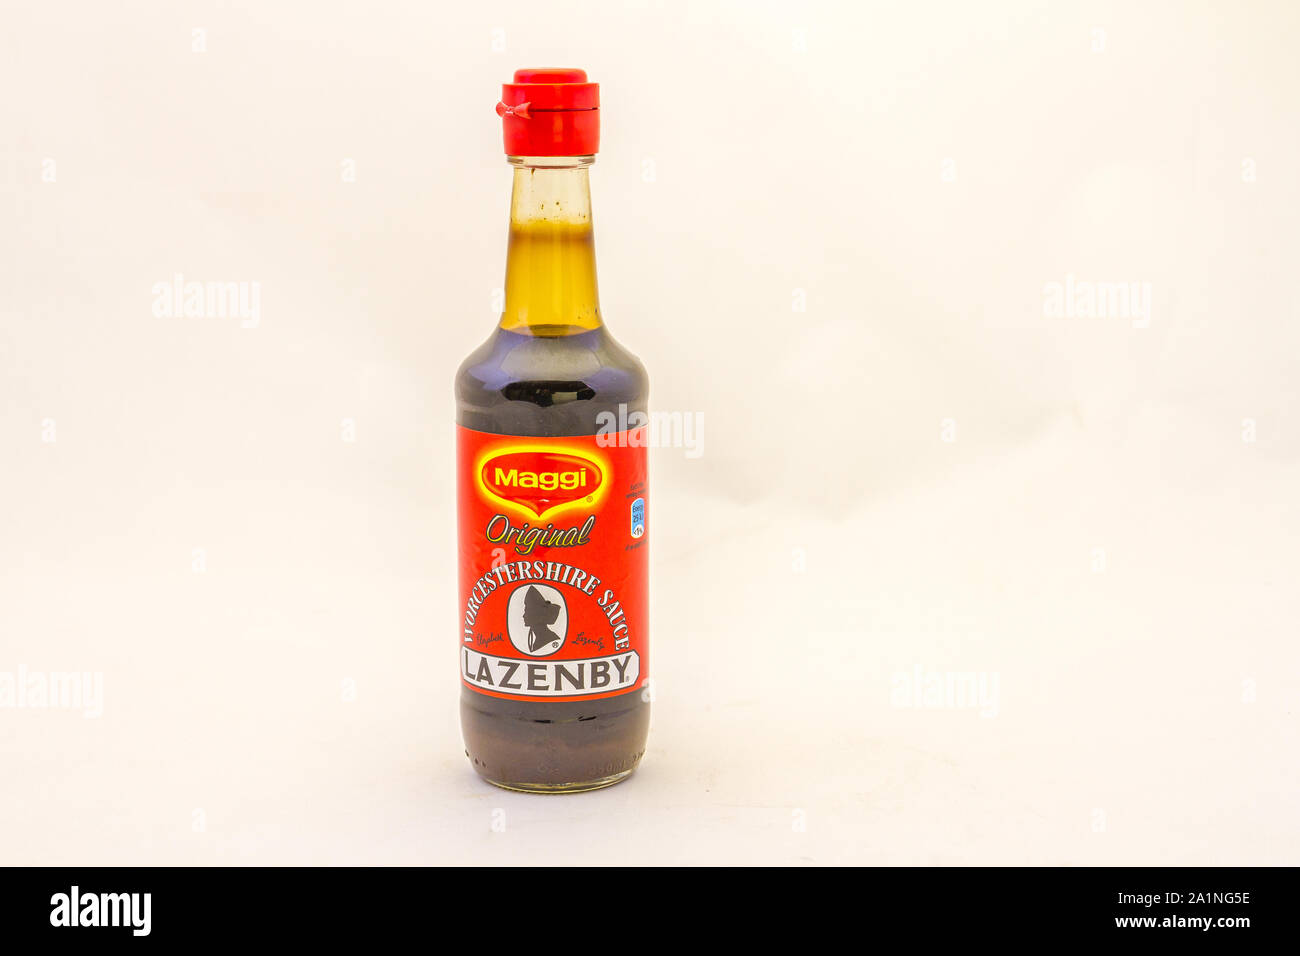 Alberton, South Africa - a bottle of Maggi Lazenby worcestershire sauce isolated on a clear background image with copy space in horizontal format Stock Photo